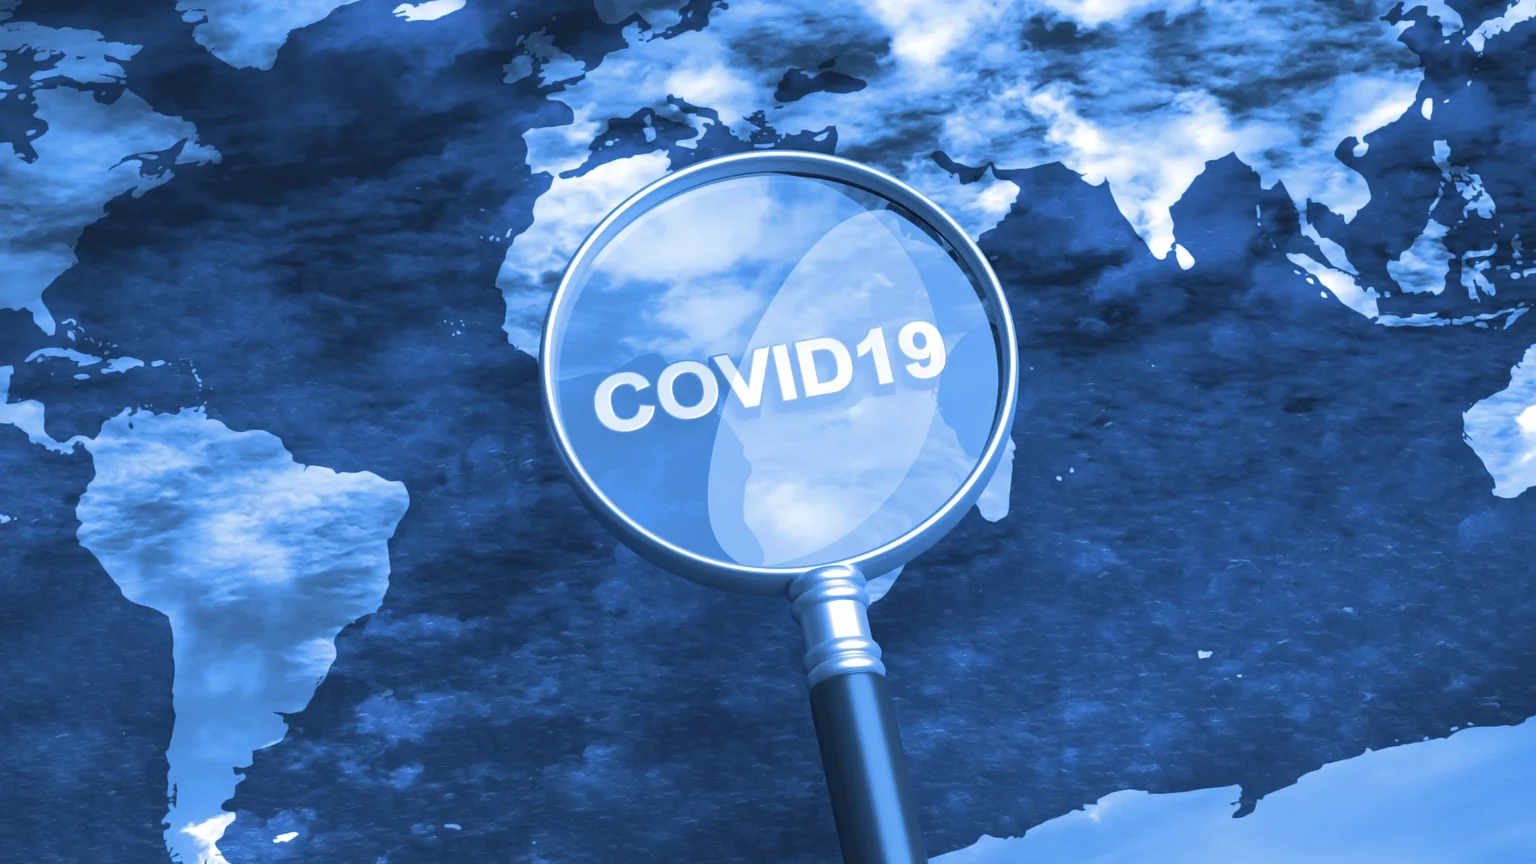 Covid-19 has caused a global lockdown. Image: Shutterstock